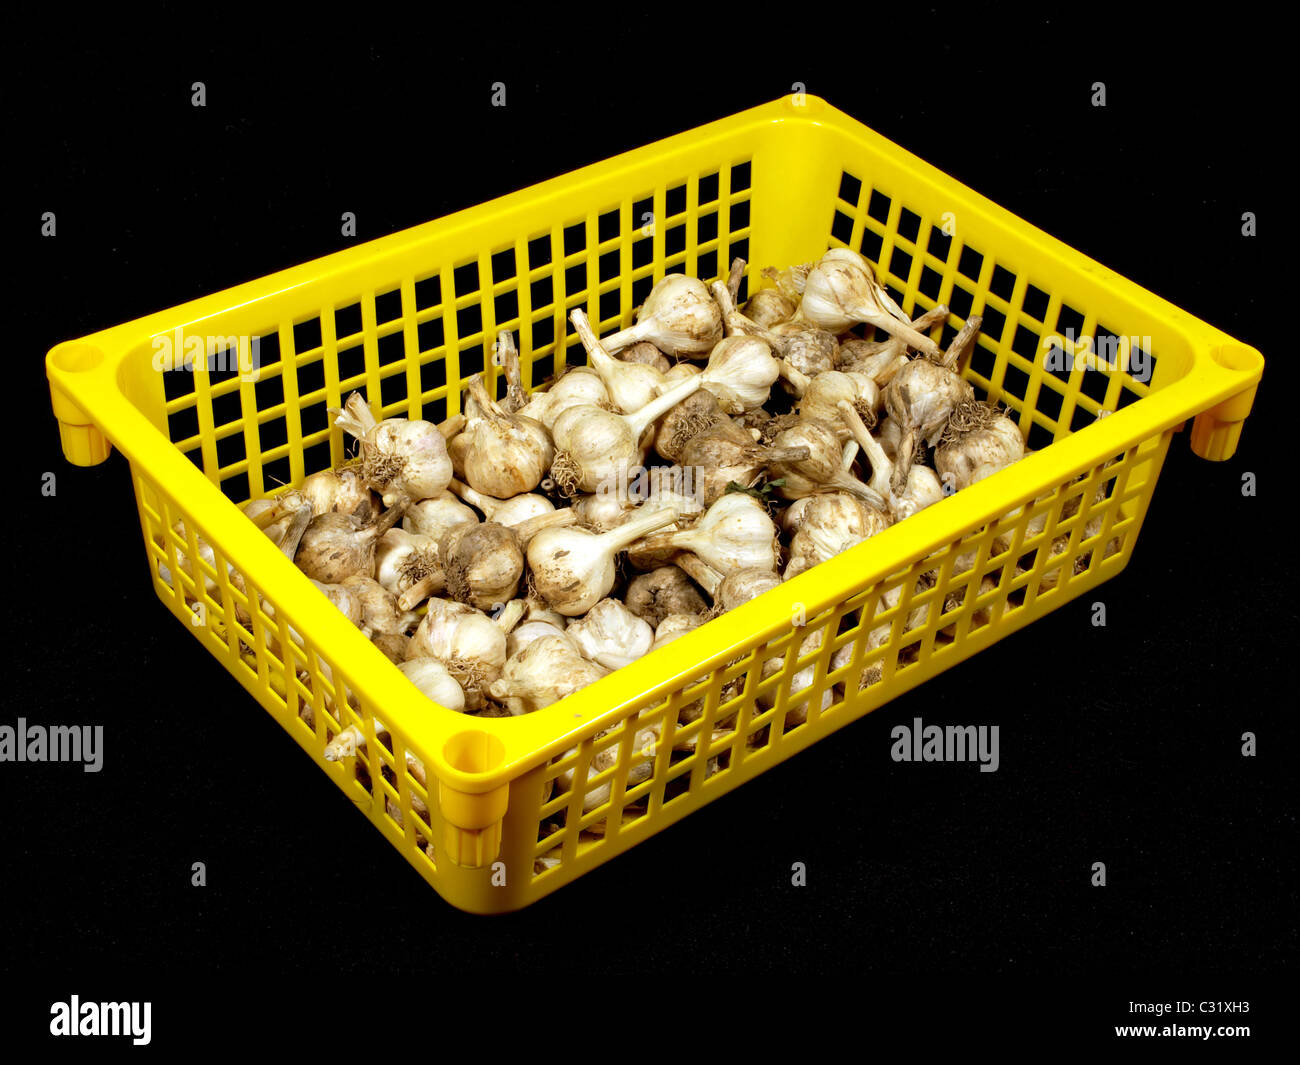 Garlic in a yellow plastic box on a black background. Stock Photo